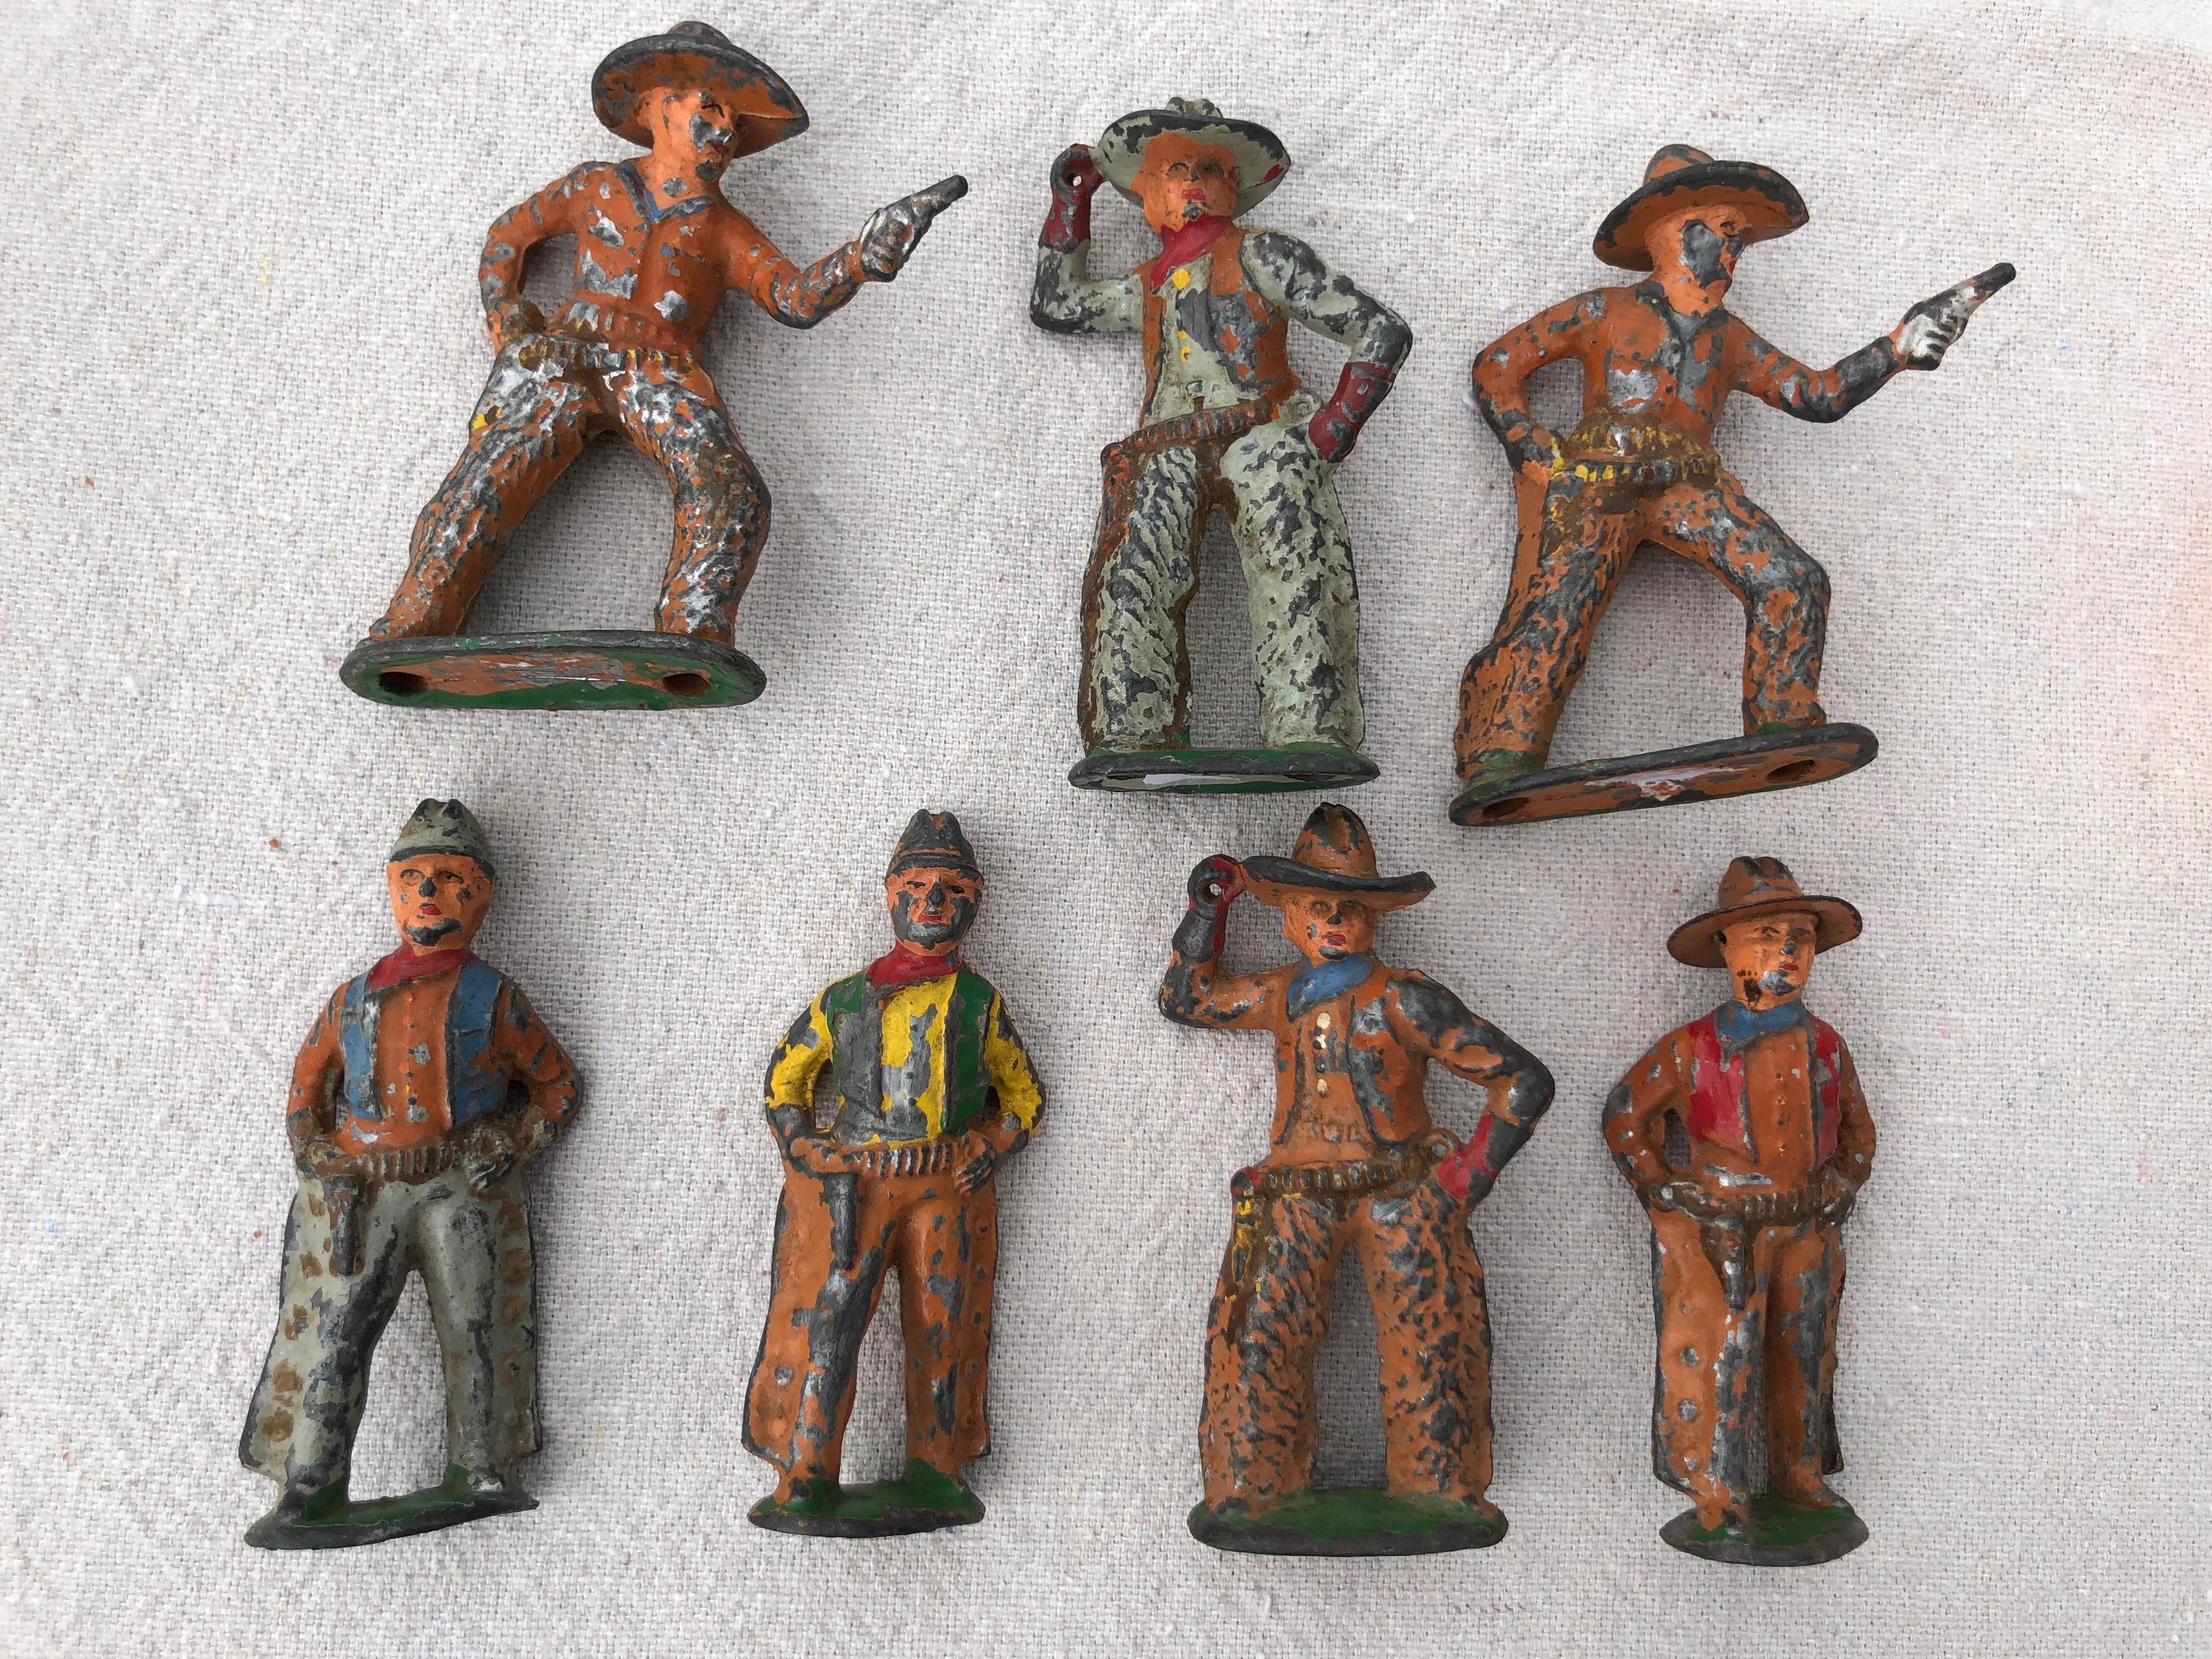 Set of 7 antique lead toy cowboys, circa 1950. Produced by BARCLAY MANOIL Maker of WESTERN TOYS .Vintage Polychromed paint finish. Perfect gift for that cowboy collector.